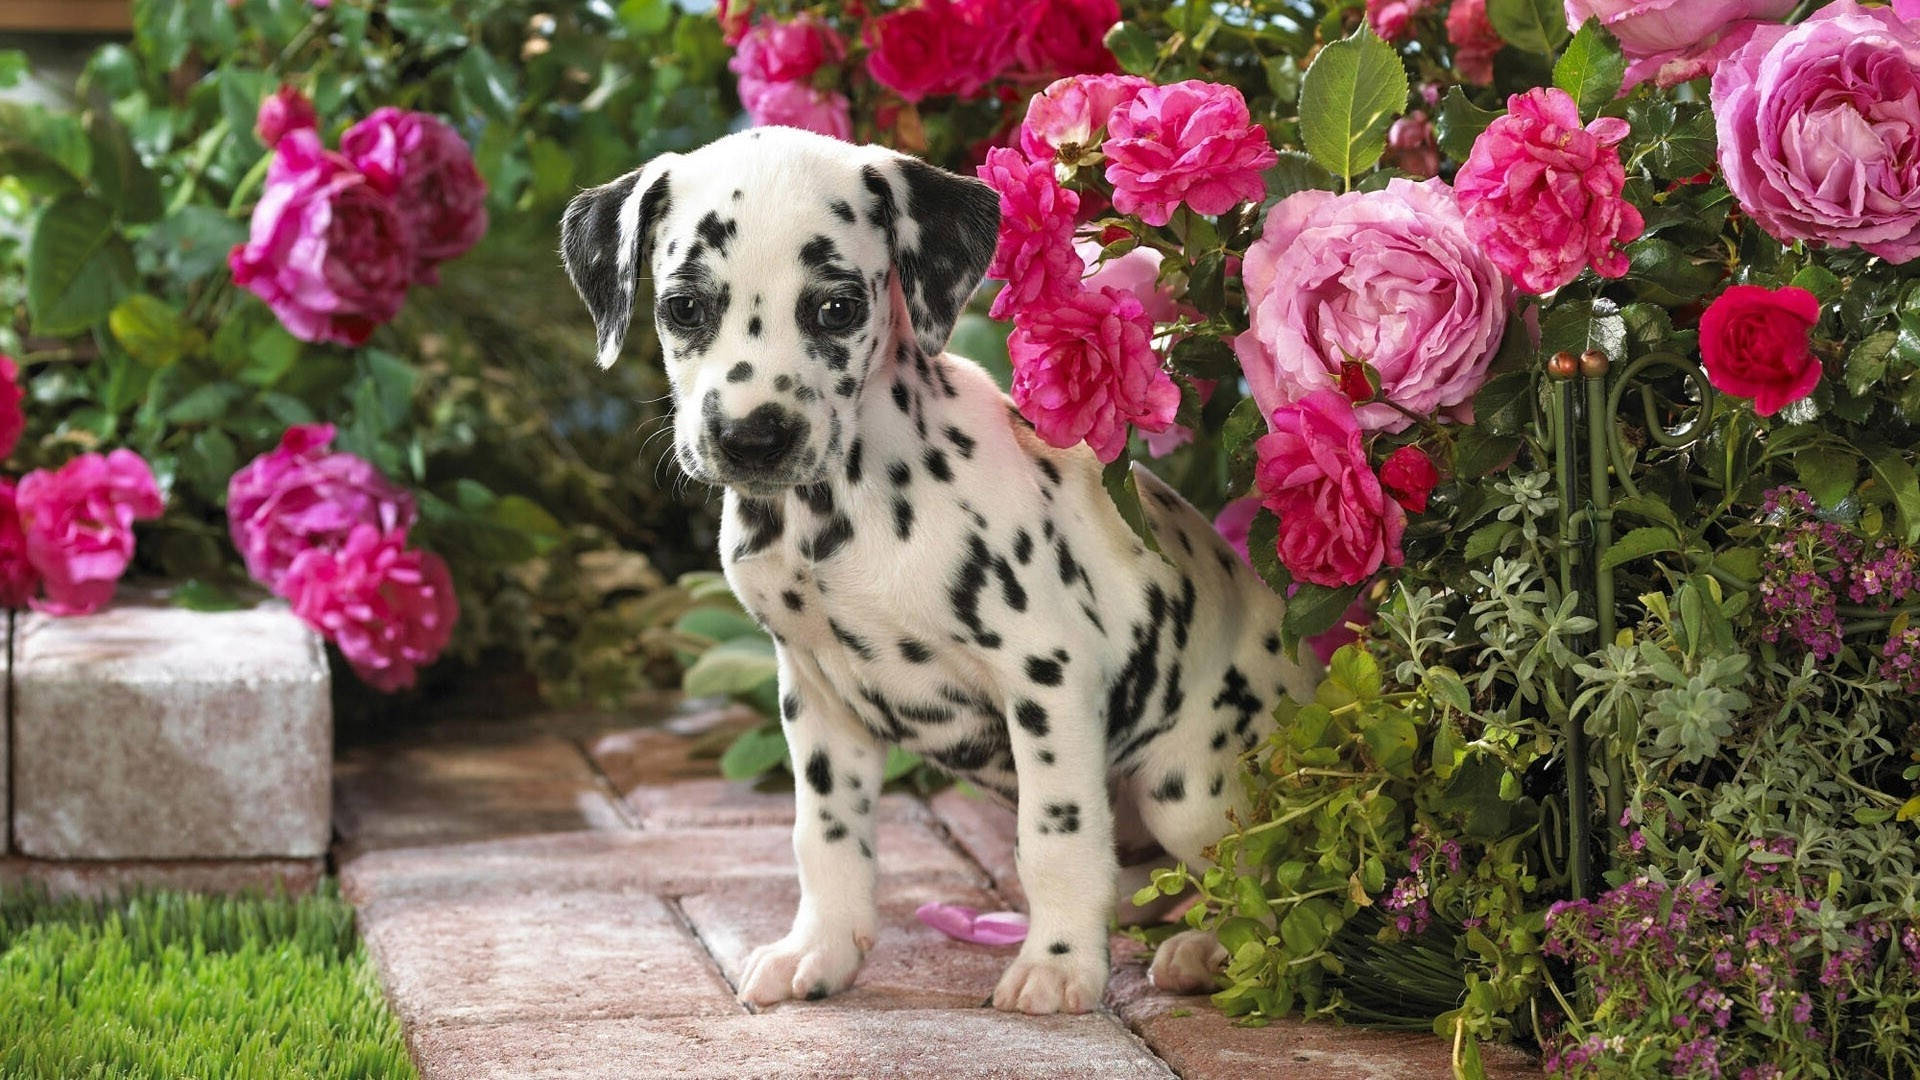 Dalmatian Puppy Among Pink Roses Background